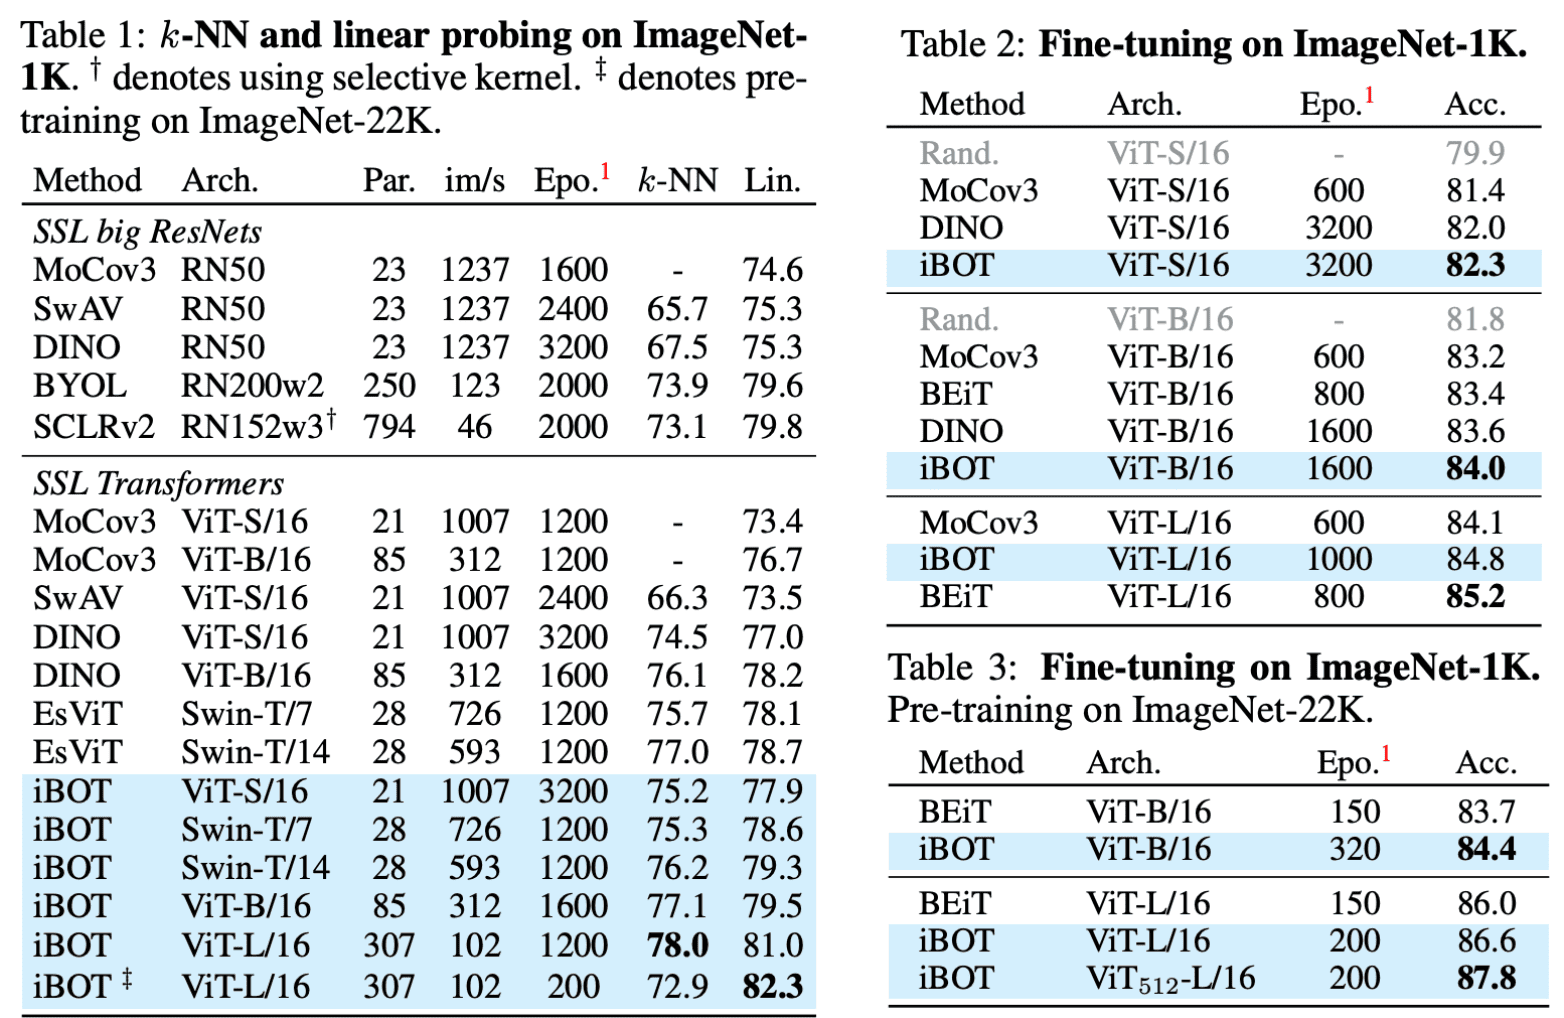 Linear Probing and Fine-tuning comparisons